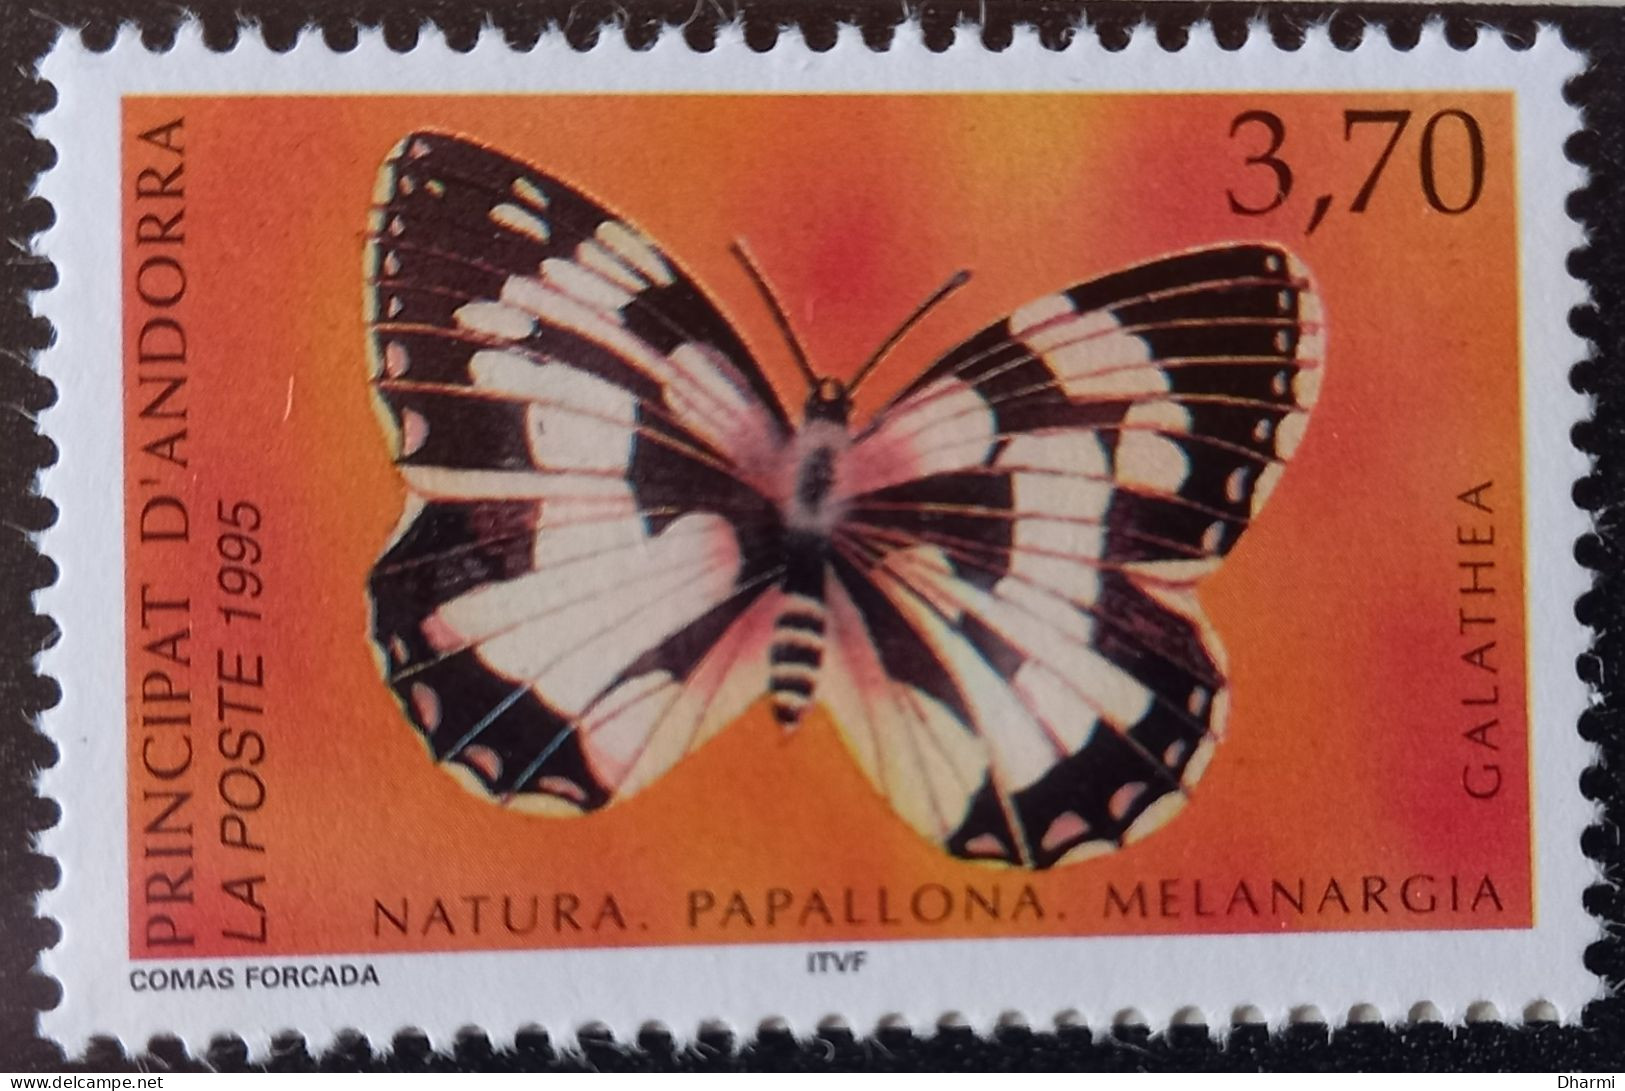 ANDORRE FR 1995 N°463 NEUF** MNH - 3.70F PAPILLON PAPALLONA - COT 2.50 € - Unused Stamps